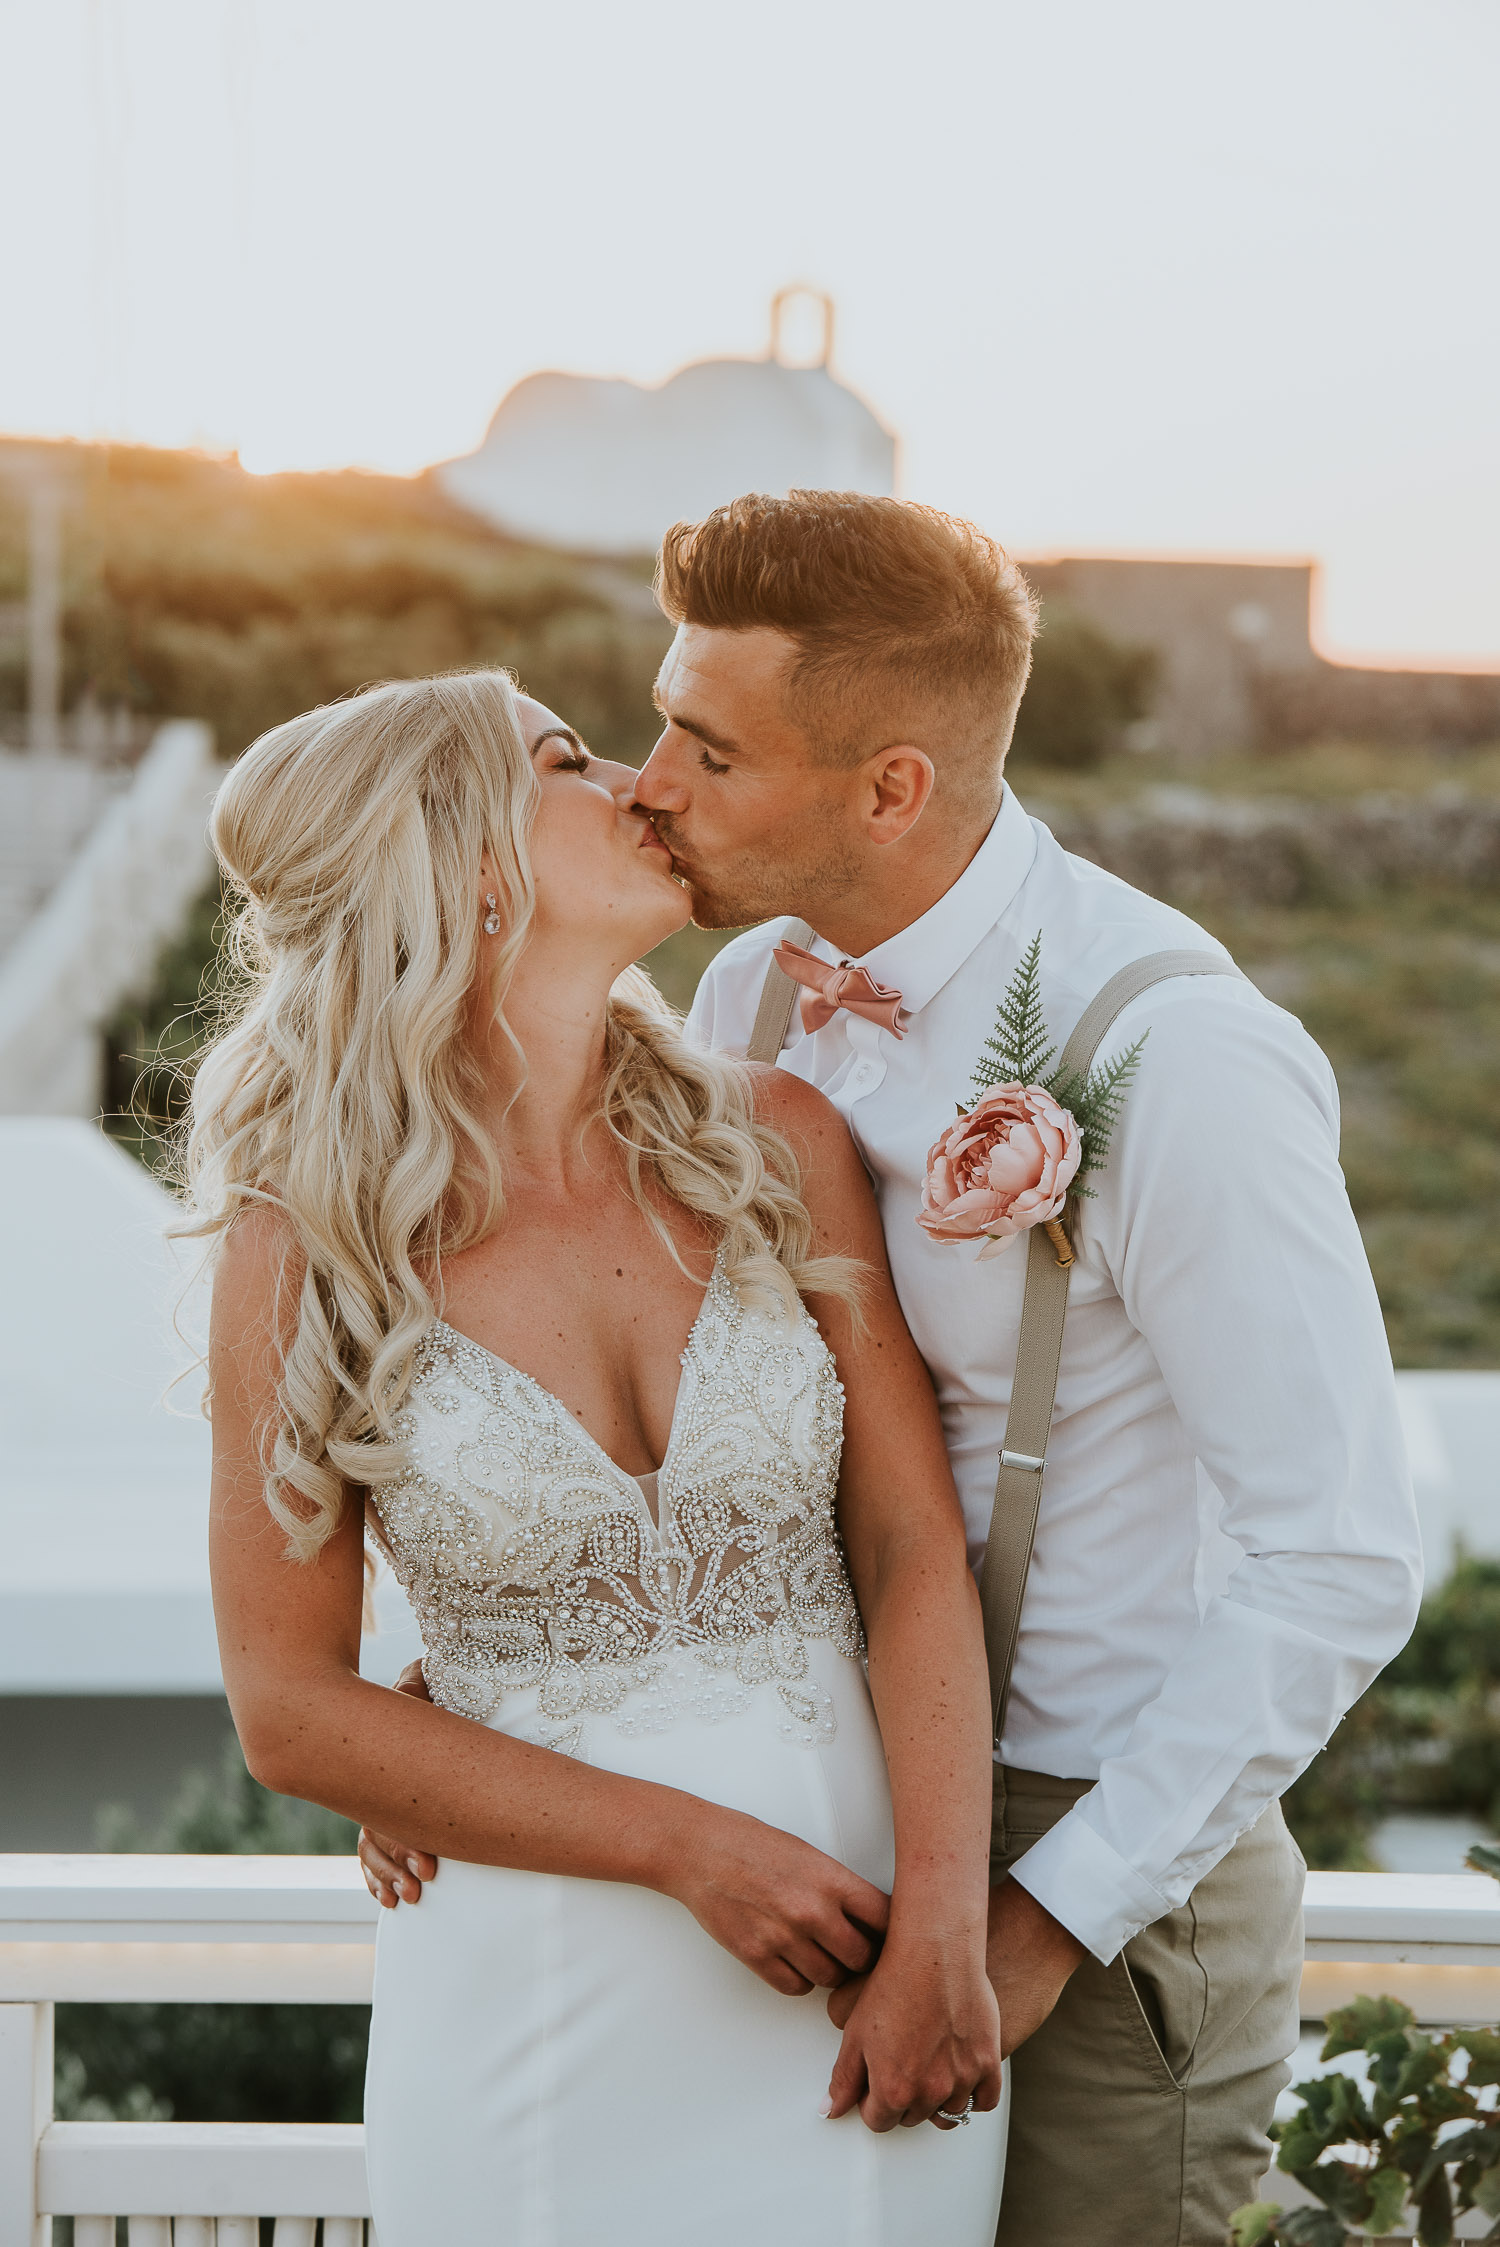 Wedding photographer Santorini: close up of bride and groom kissing backlit by golden sunset light with a church in the background by Ben and Vesna.